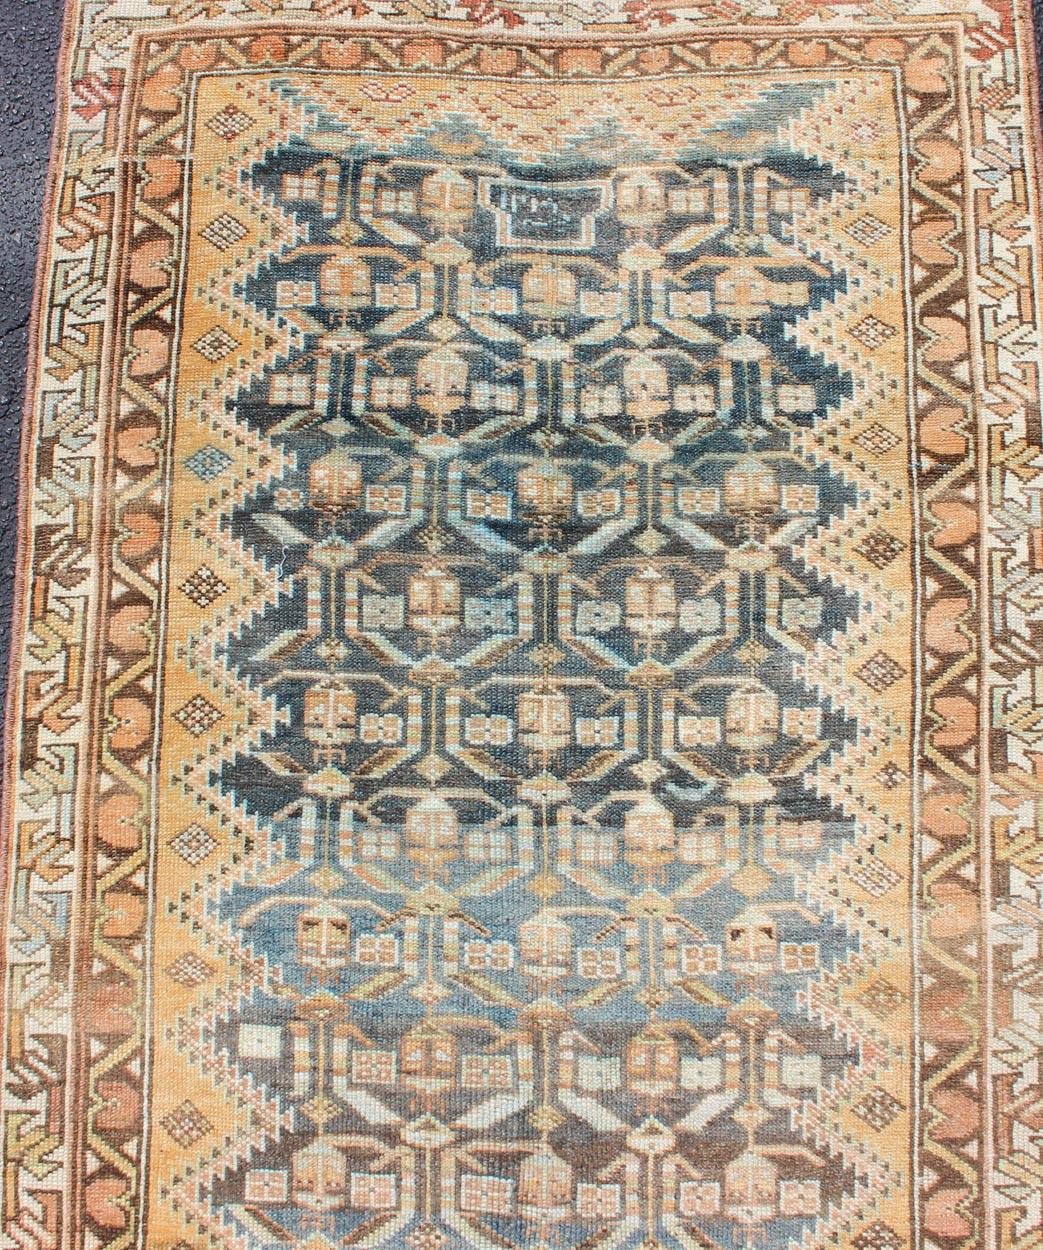 Wool Antique Persian Malayer Runner with Teal, Gray, Blue & Brown in Geometric Design For Sale